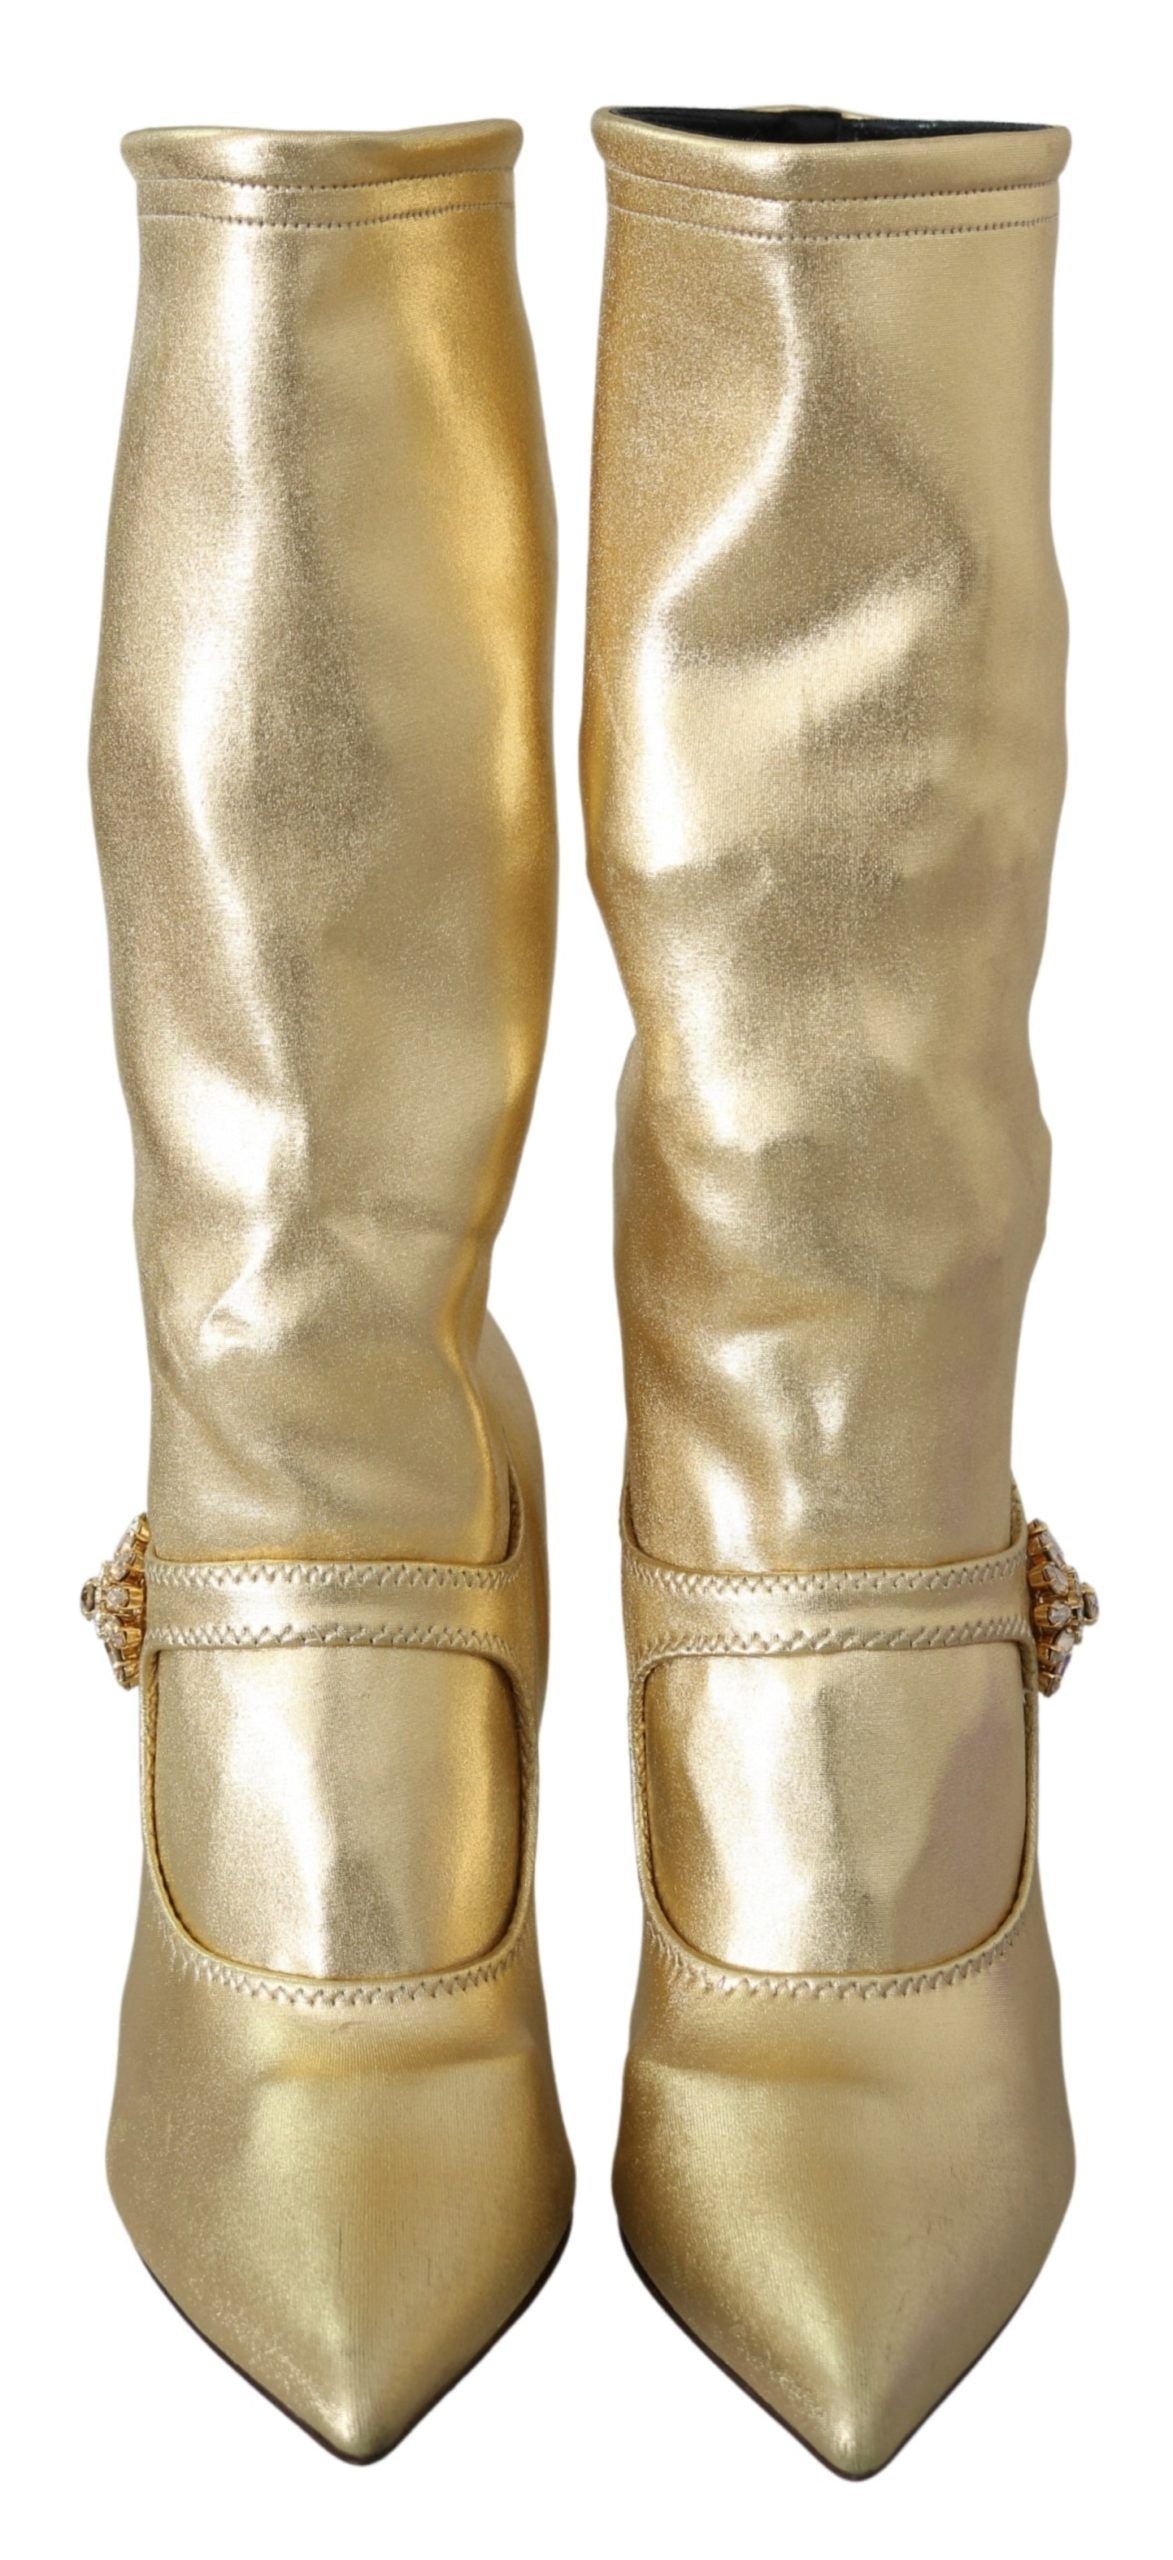 Dolce & Gabbana Gold Rhinestones Ankle Boots Socks Shoes